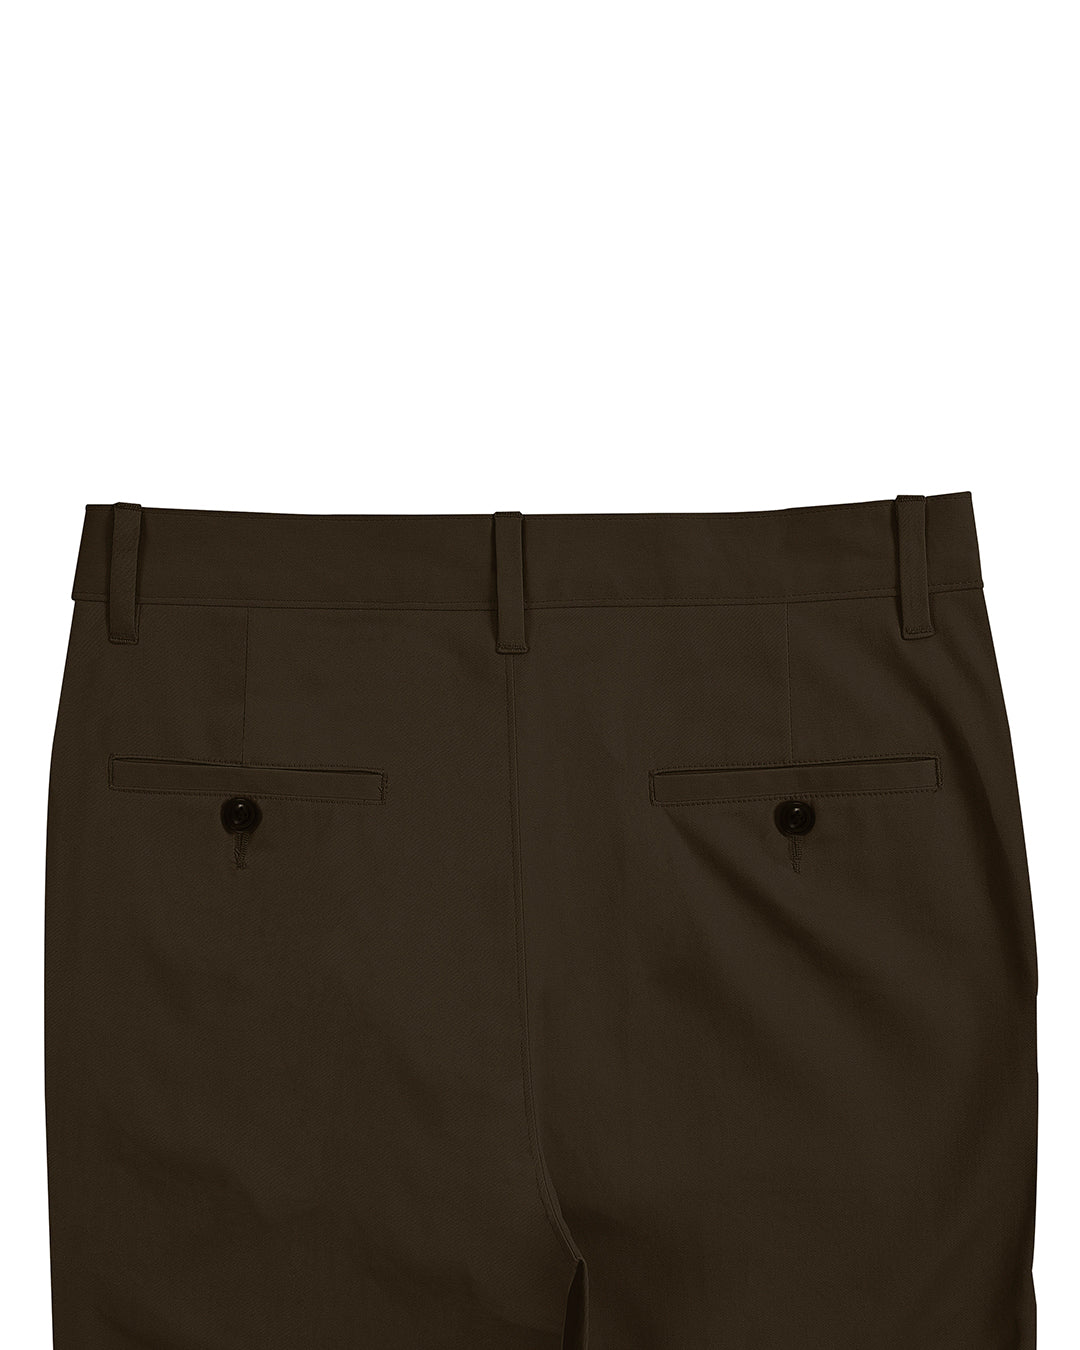 Back view of custom Genoa Chino pants for men by Luxire in choco brown